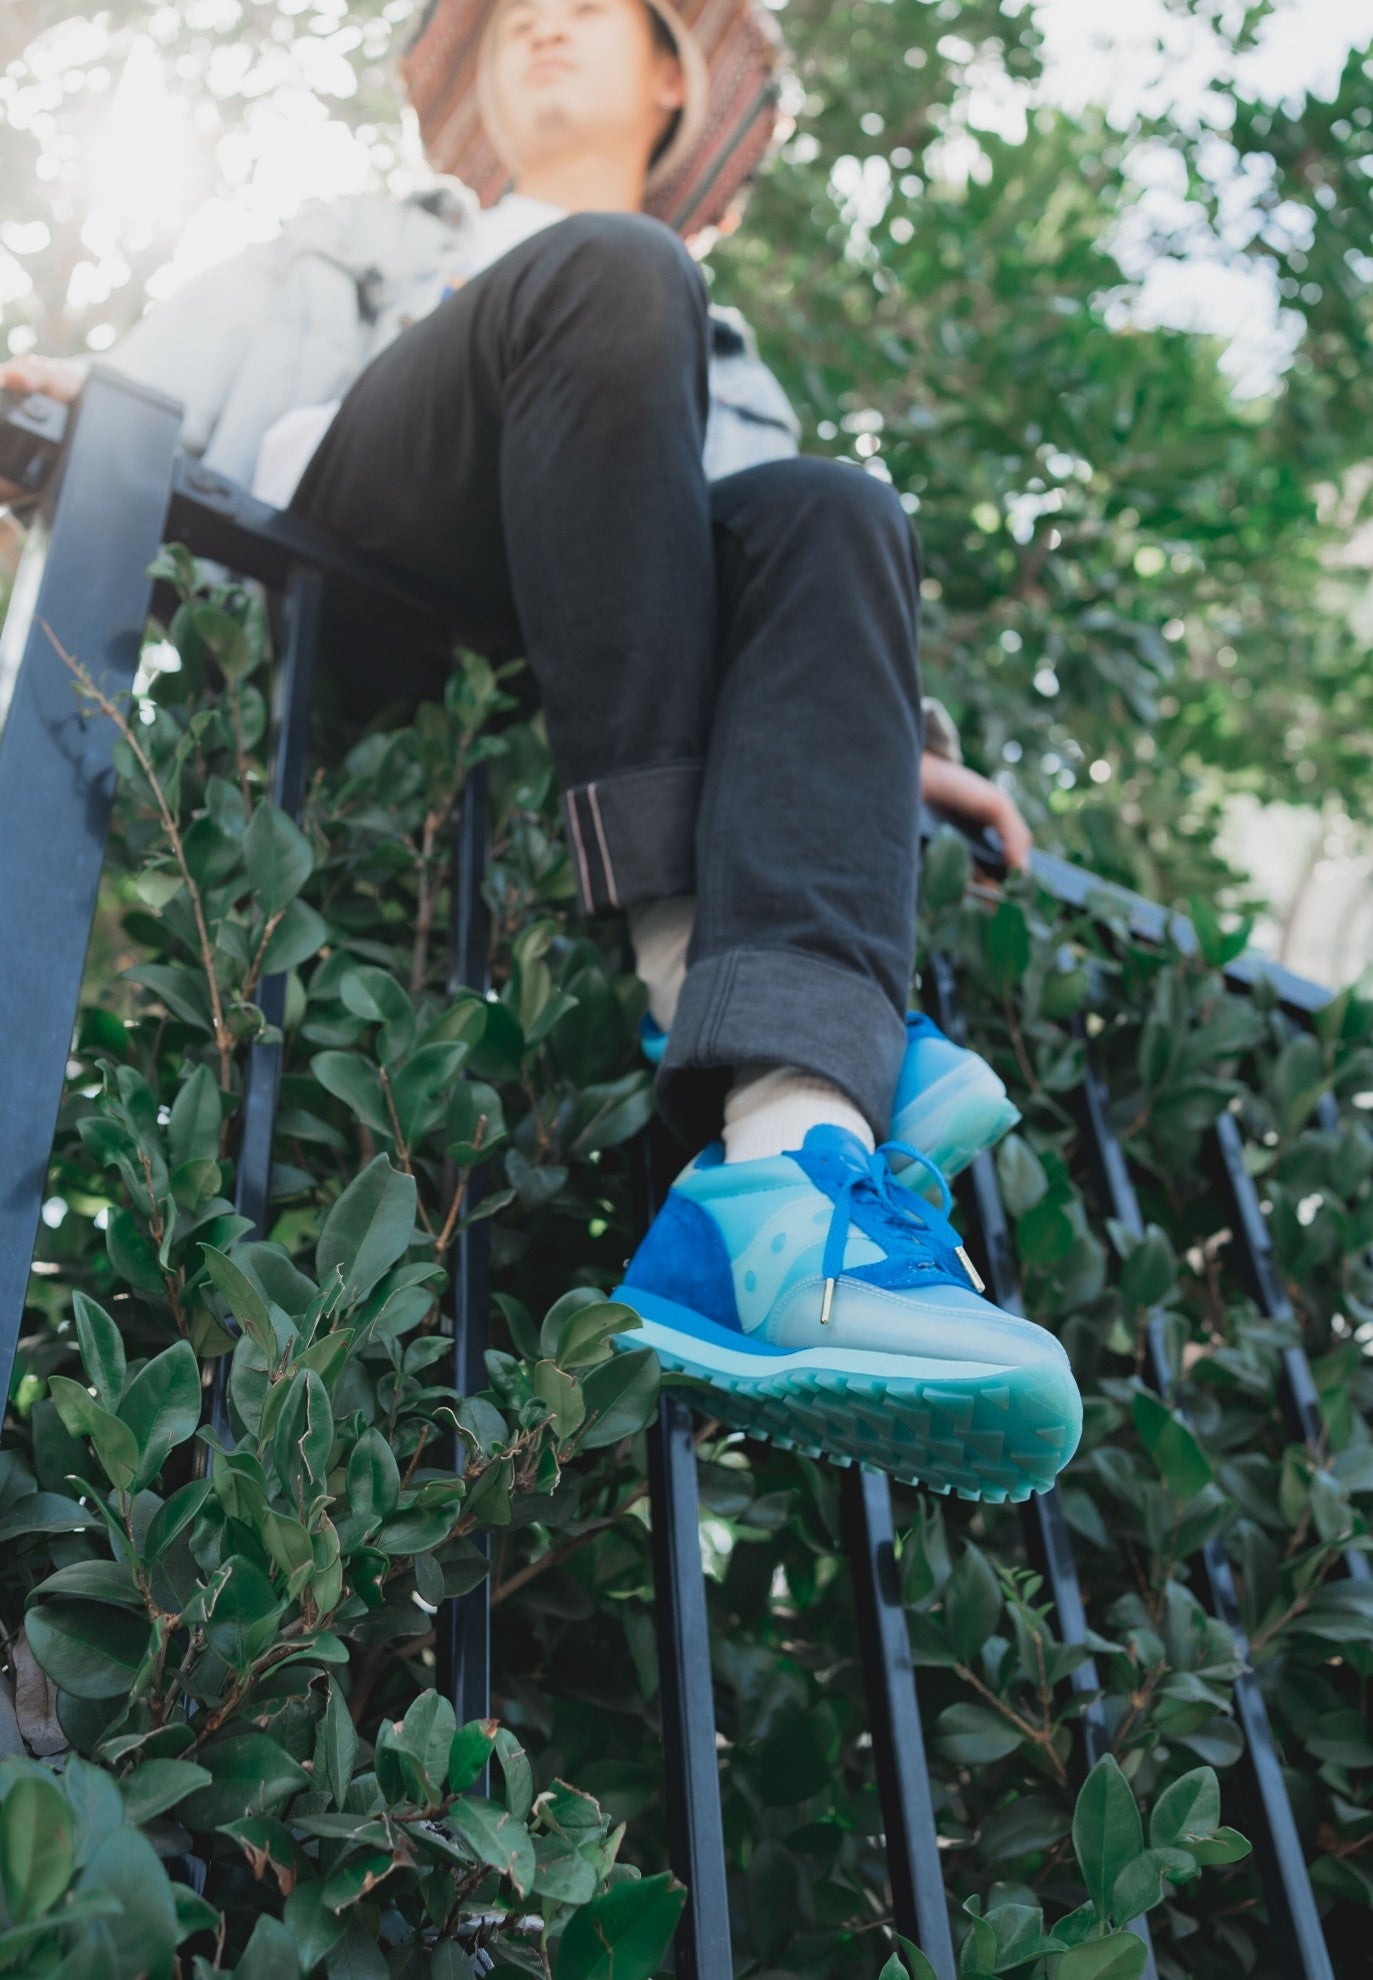 A man sitting on a black fence wearing black jeans and a pair of blue sneakers